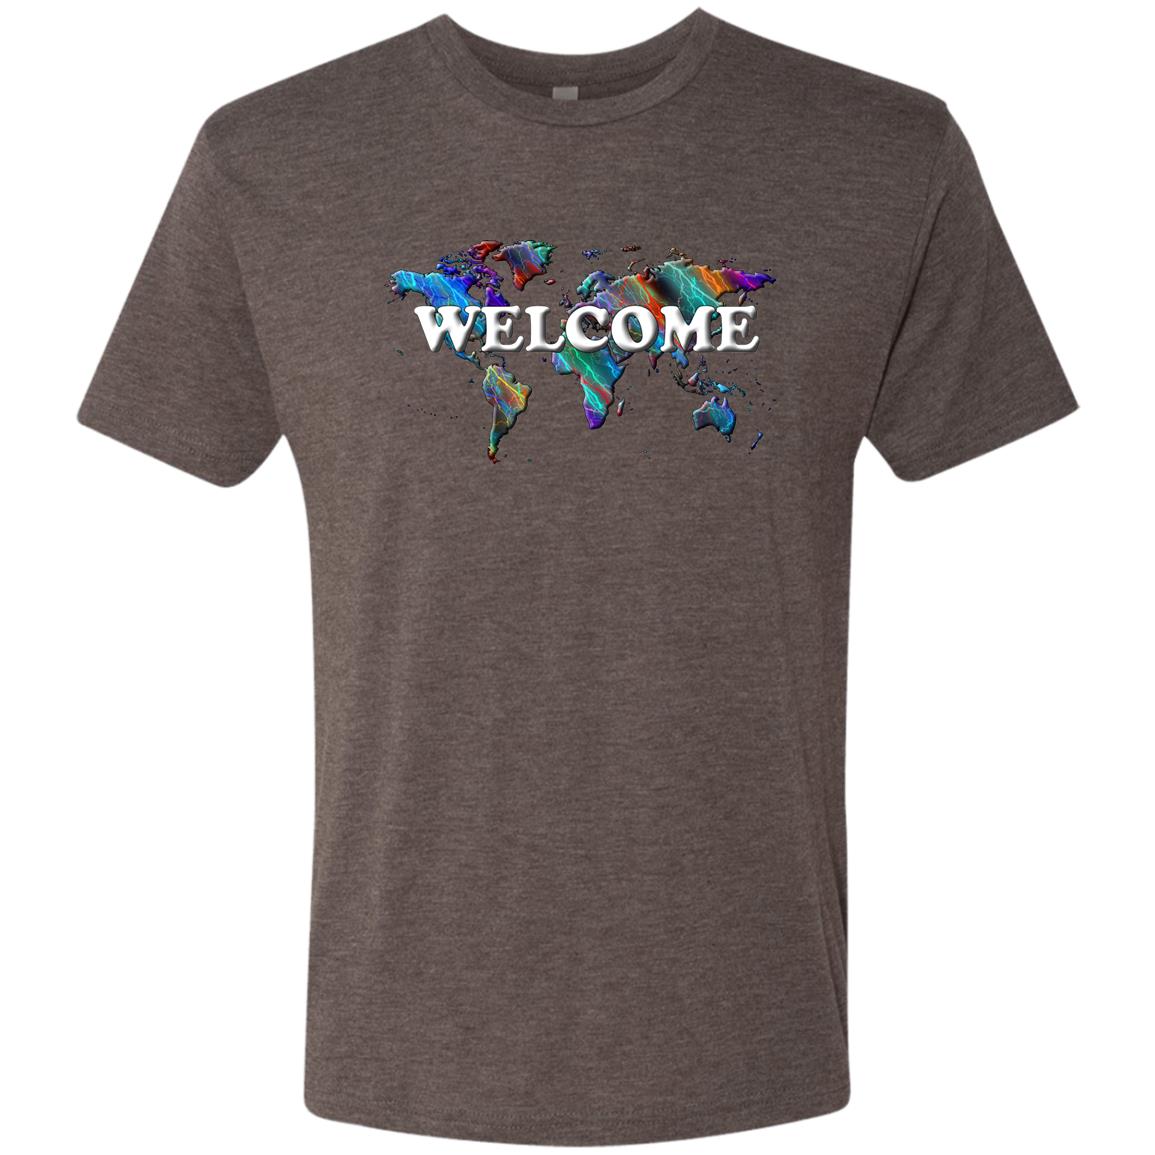 Welcome Statement T-Shirt